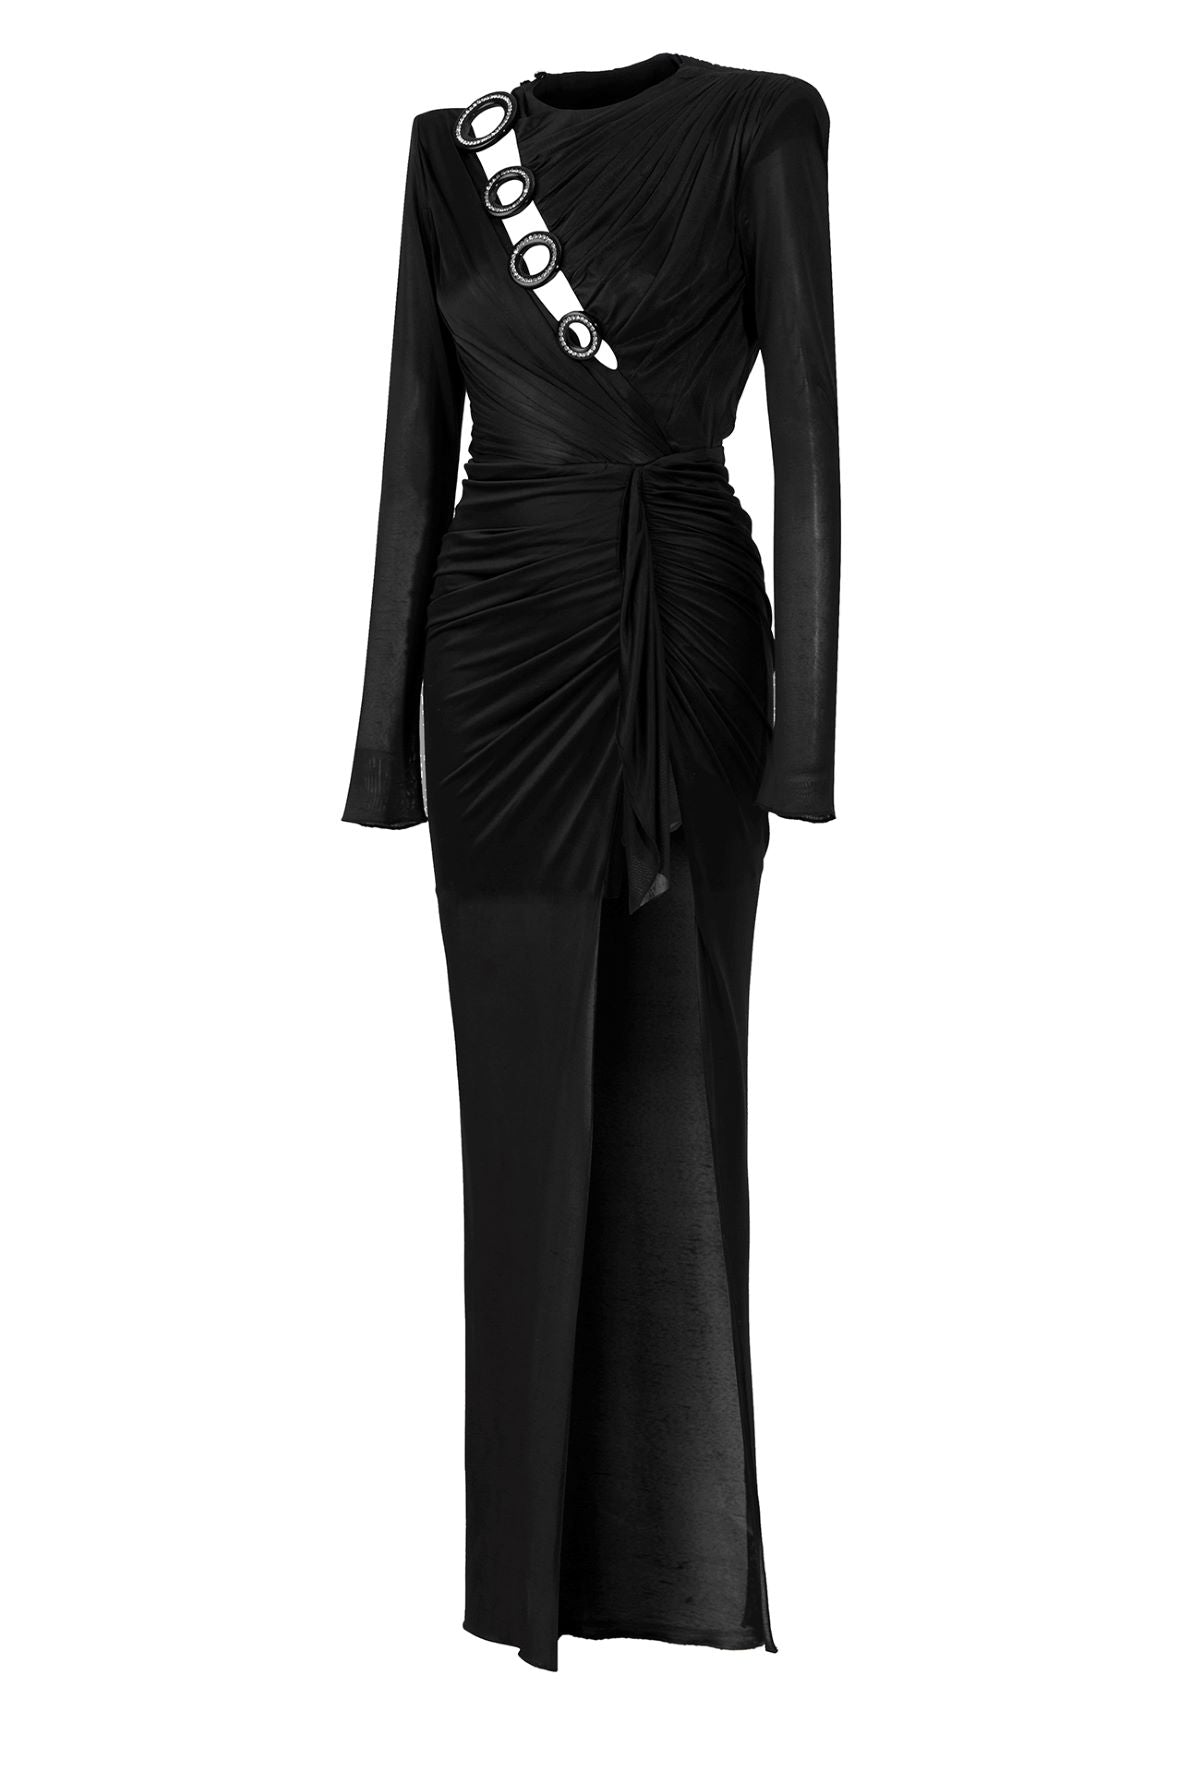 LONG SLEEVED CRYSTAL BUTTONED MIDI DRESS WITH HIGH SLIT